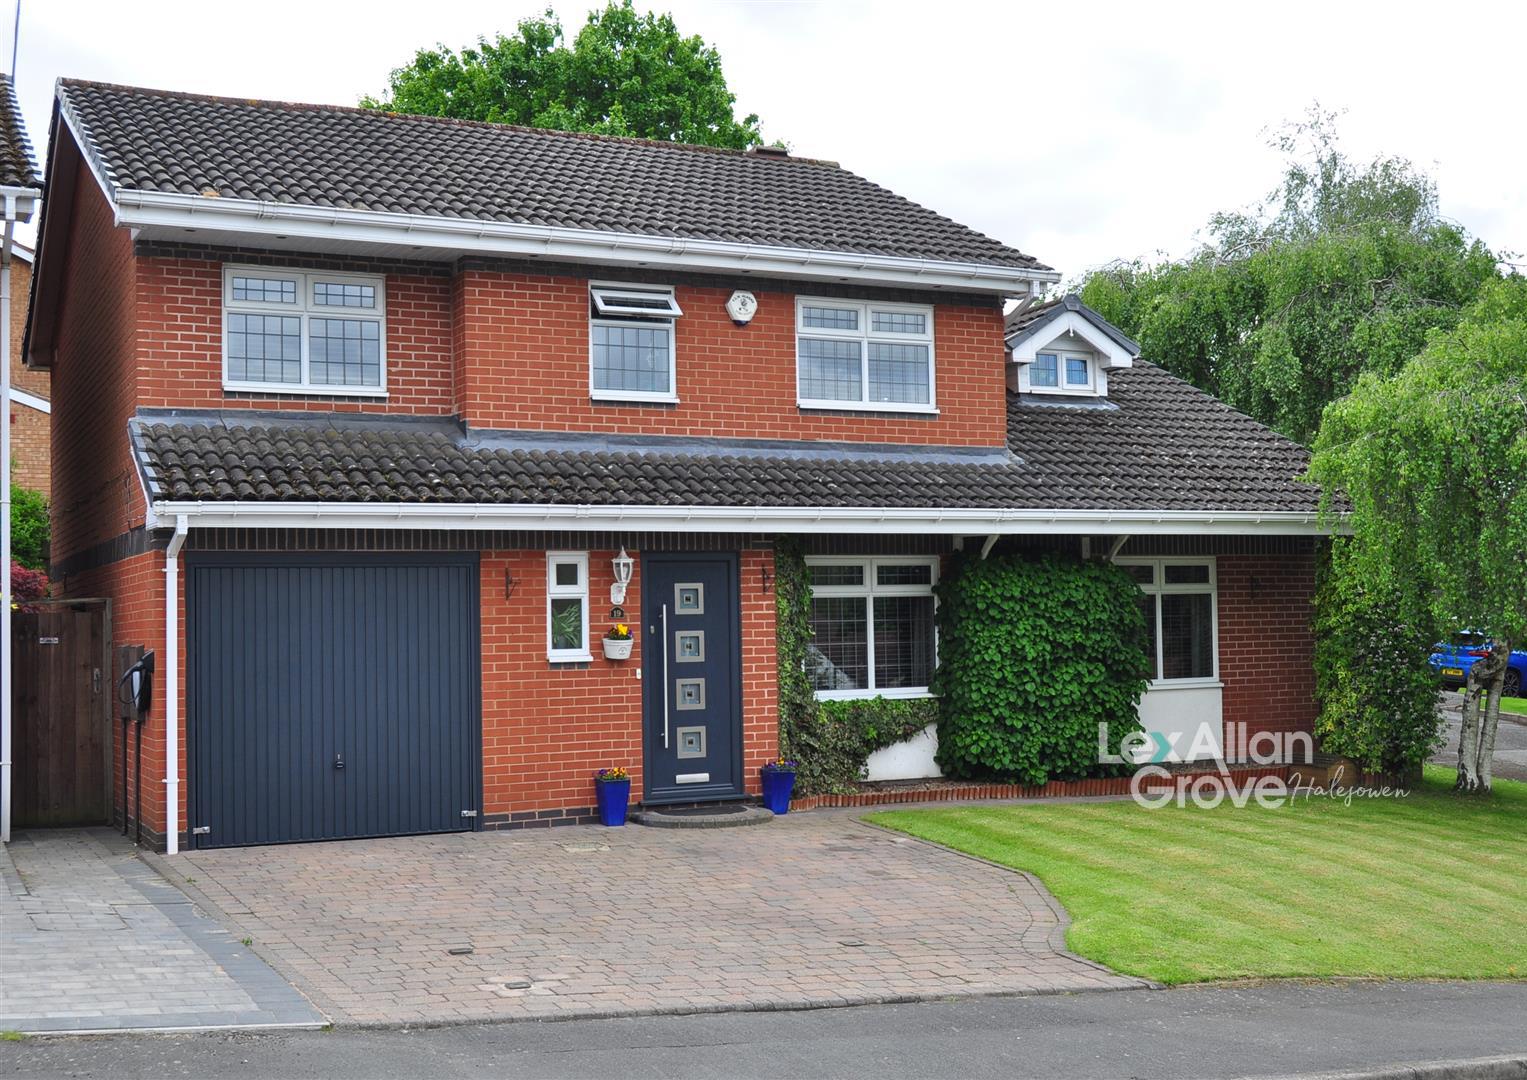 5 bed detached house for sale in Foxhollies Drive, Halesowen, B63 